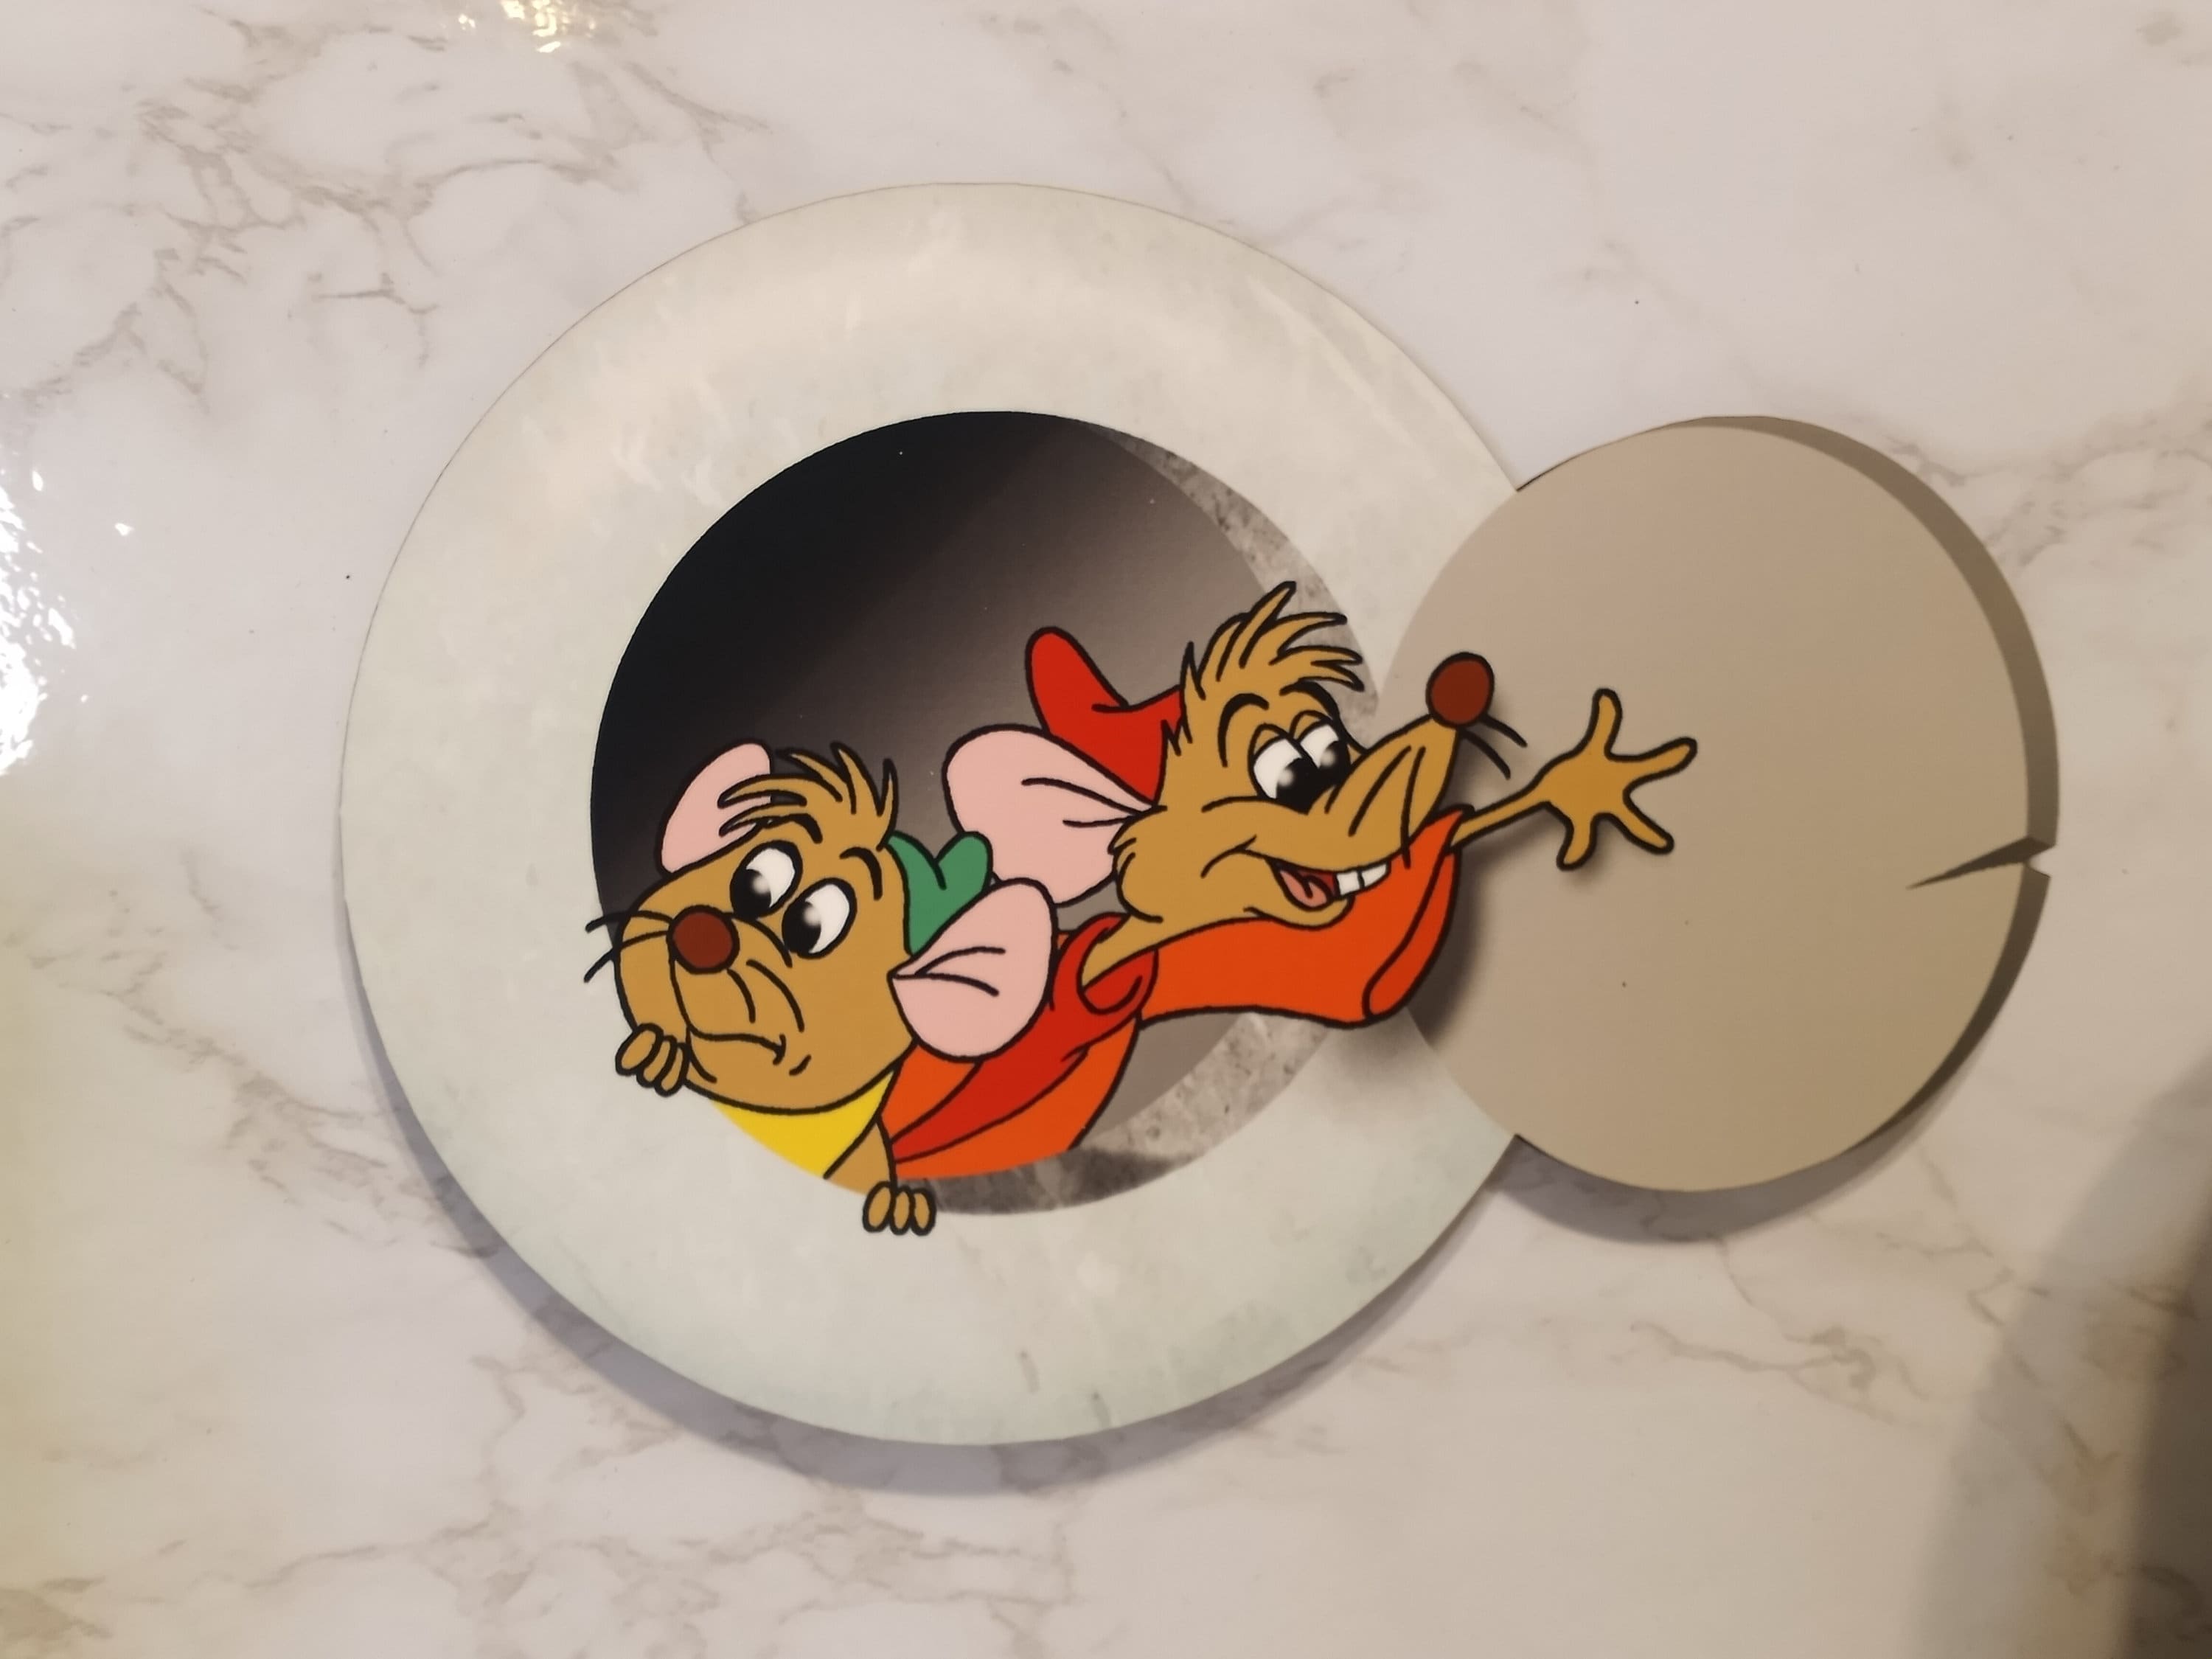 Cinderella's Jaq & Gus "Mouse hole"